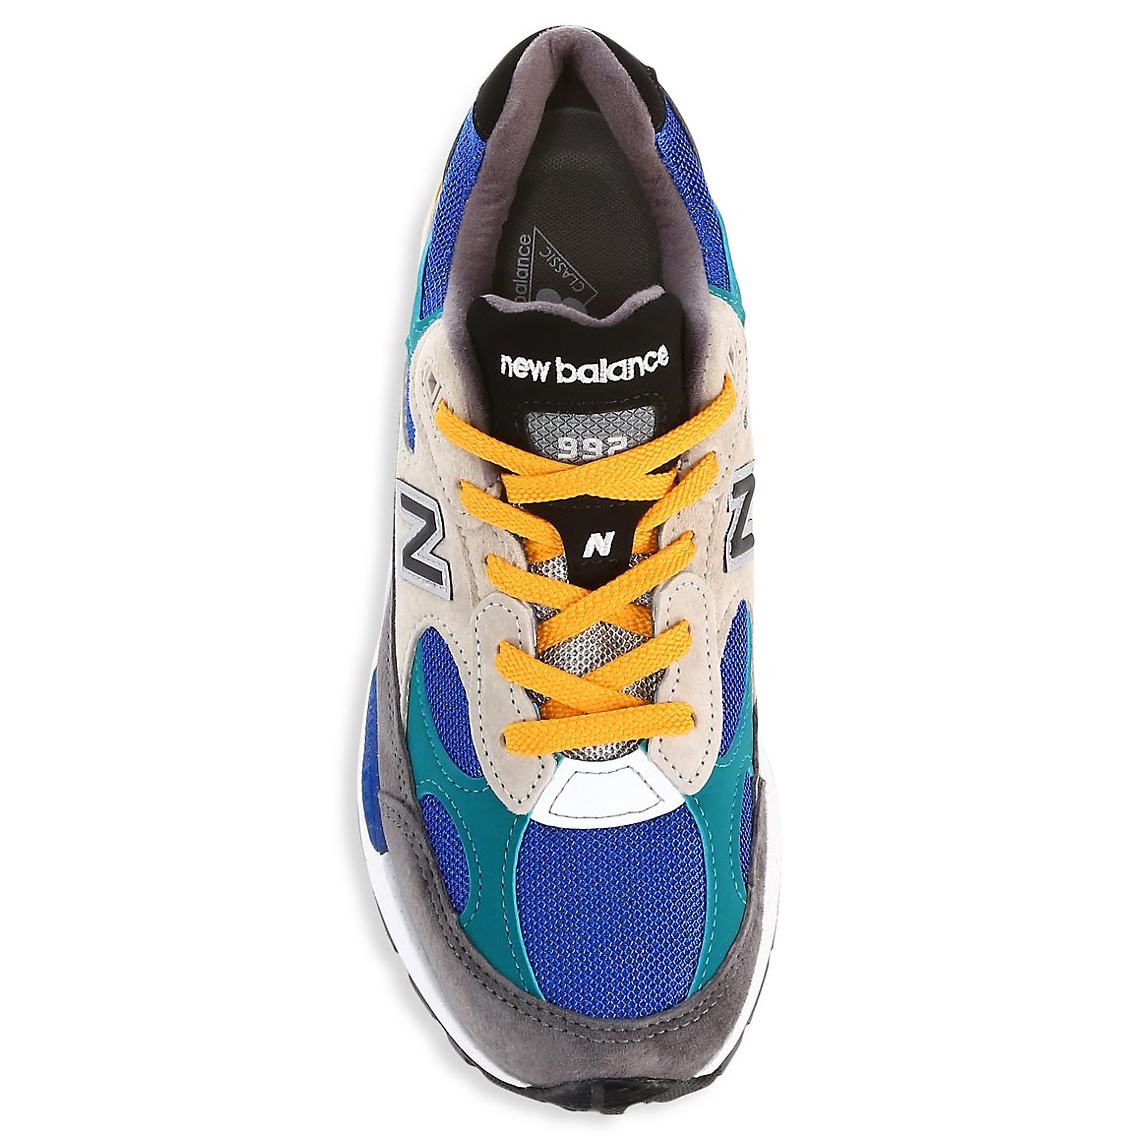 New Balance 992 Colorblock Grey Green Yellow Release Date | SneakerNews.com